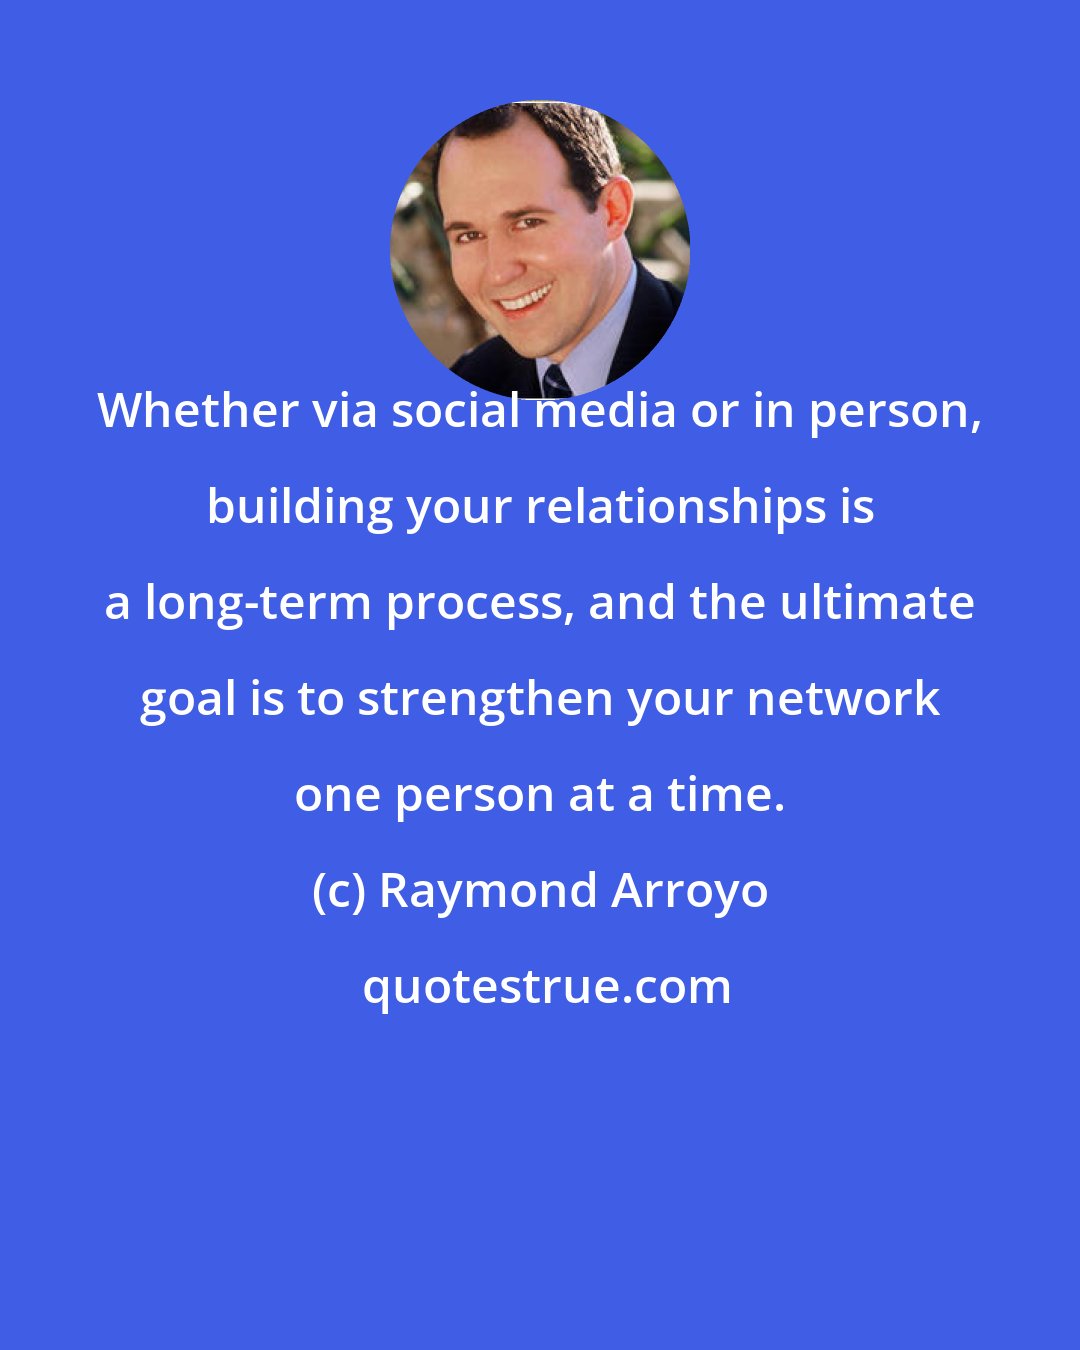 Raymond Arroyo: Whether via social media or in person, building your relationships is a long-term process, and the ultimate goal is to strengthen your network one person at a time.